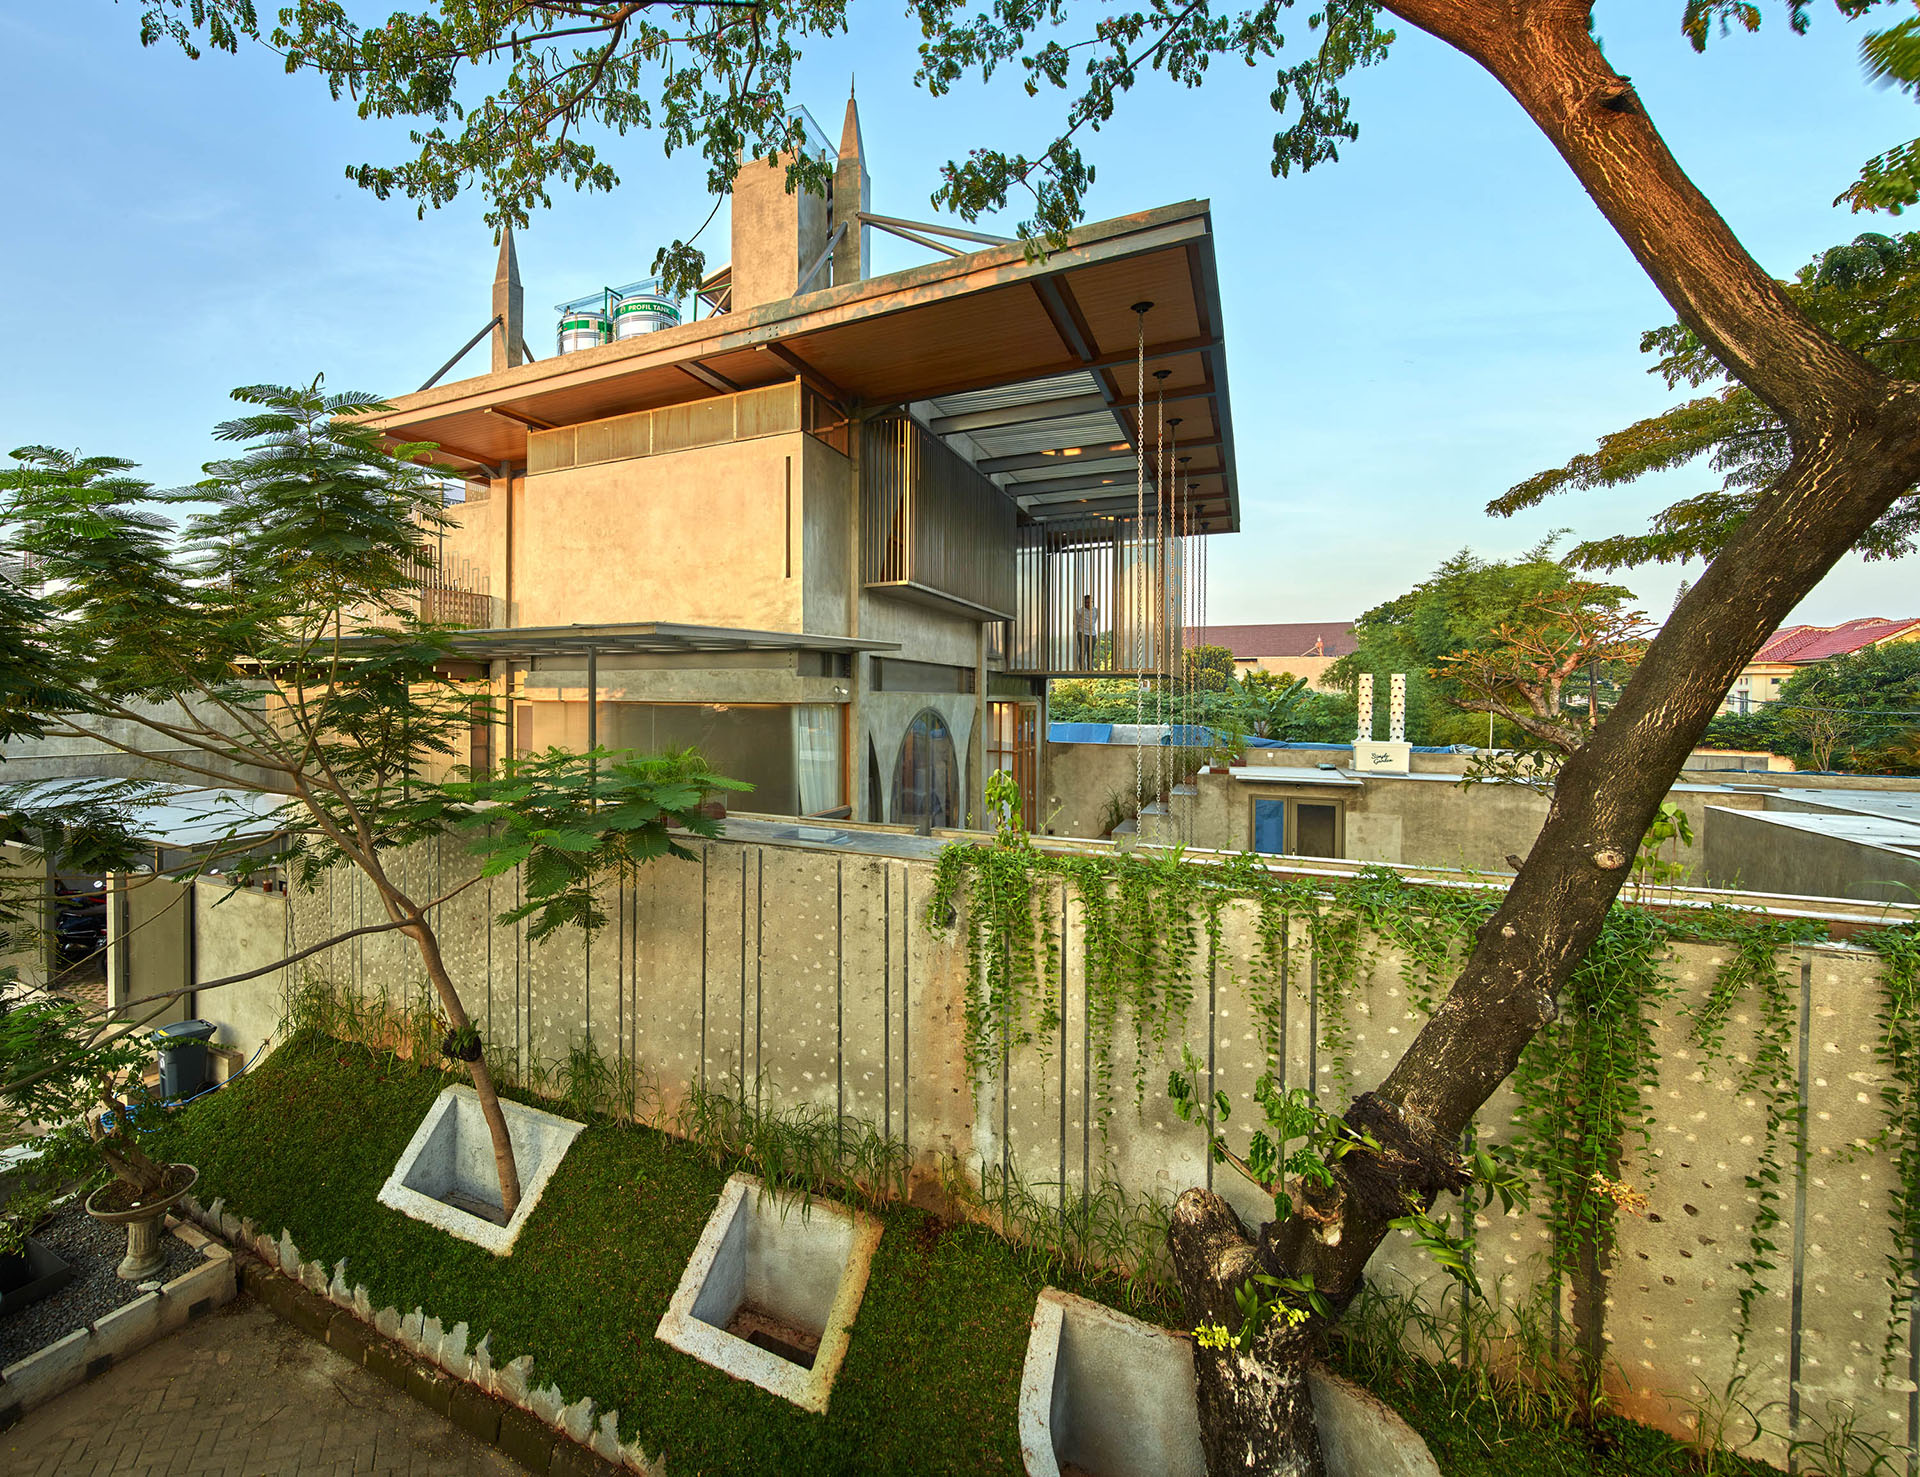 <p>View from outside. A private project for a 3-bedroom house with design studio evolved into a public-oriented one to promote architectural learning.&nbsp;</p>